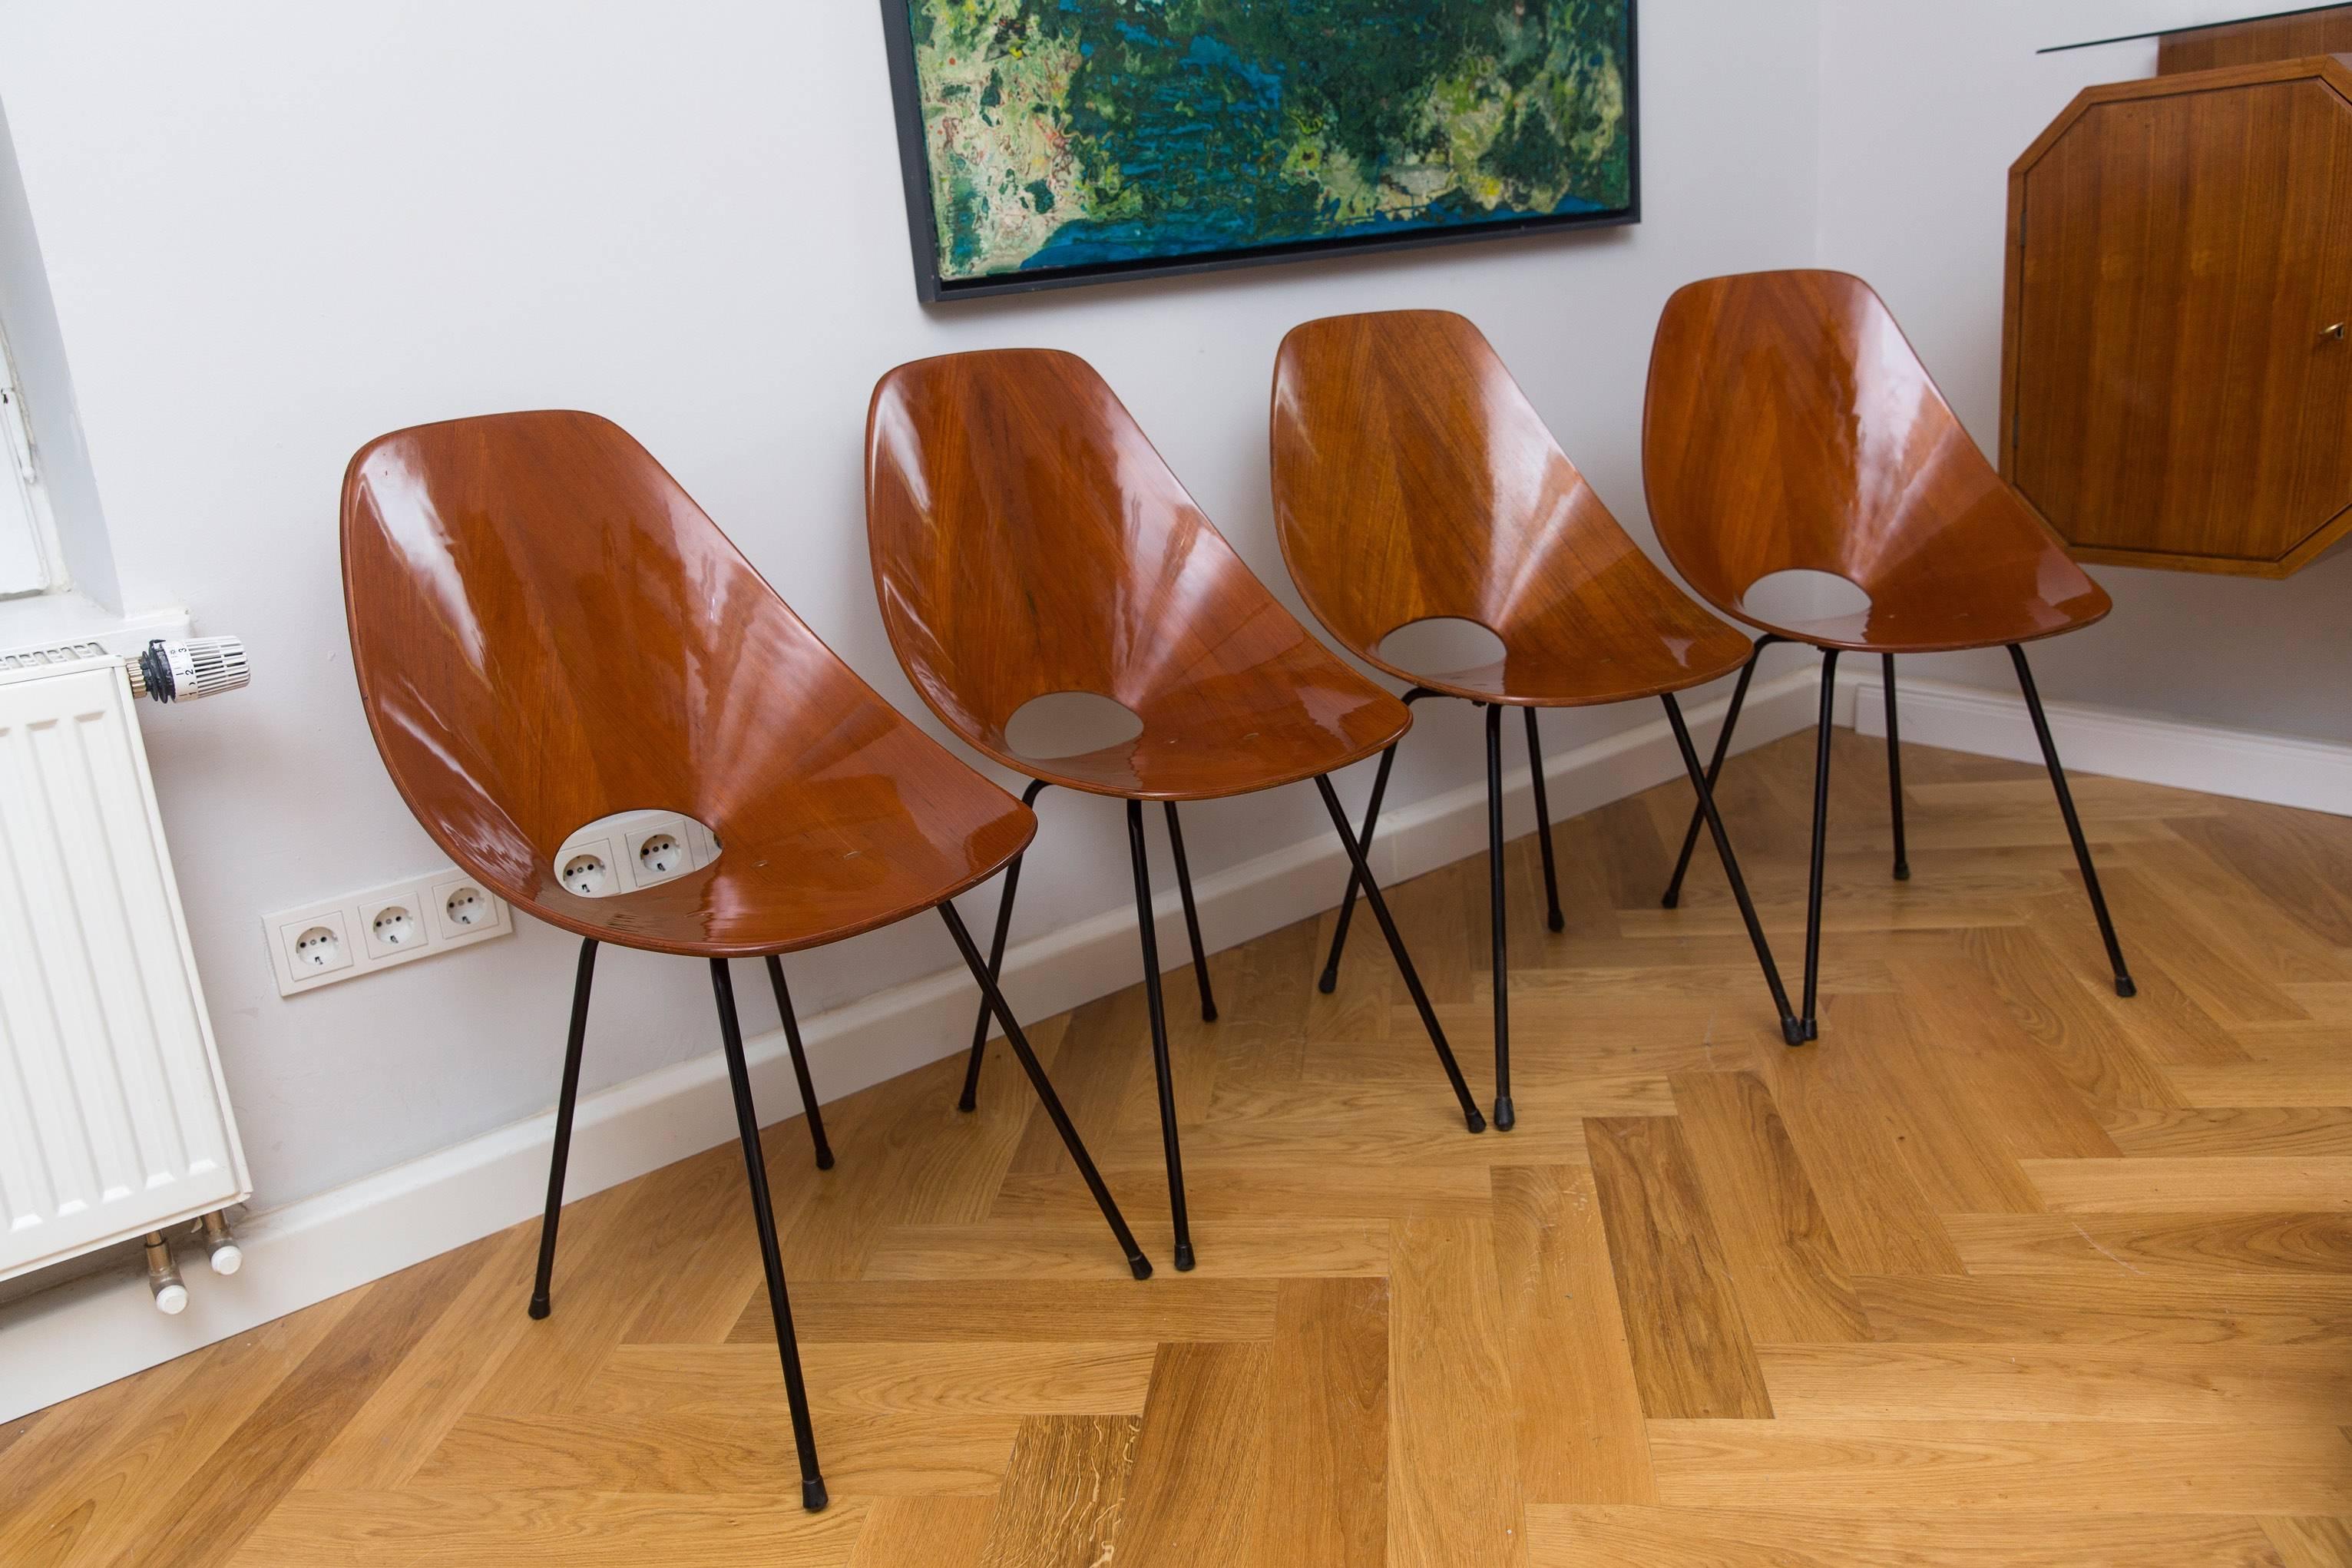 A very elegant set of four Vittorio Nobili Medea chairs, Italy, circa 1960, lacquered Palisander wood, black lacquered metal legs, signed Medea backside on the bottom of each chair. All chairs are restored and in a very good condition.